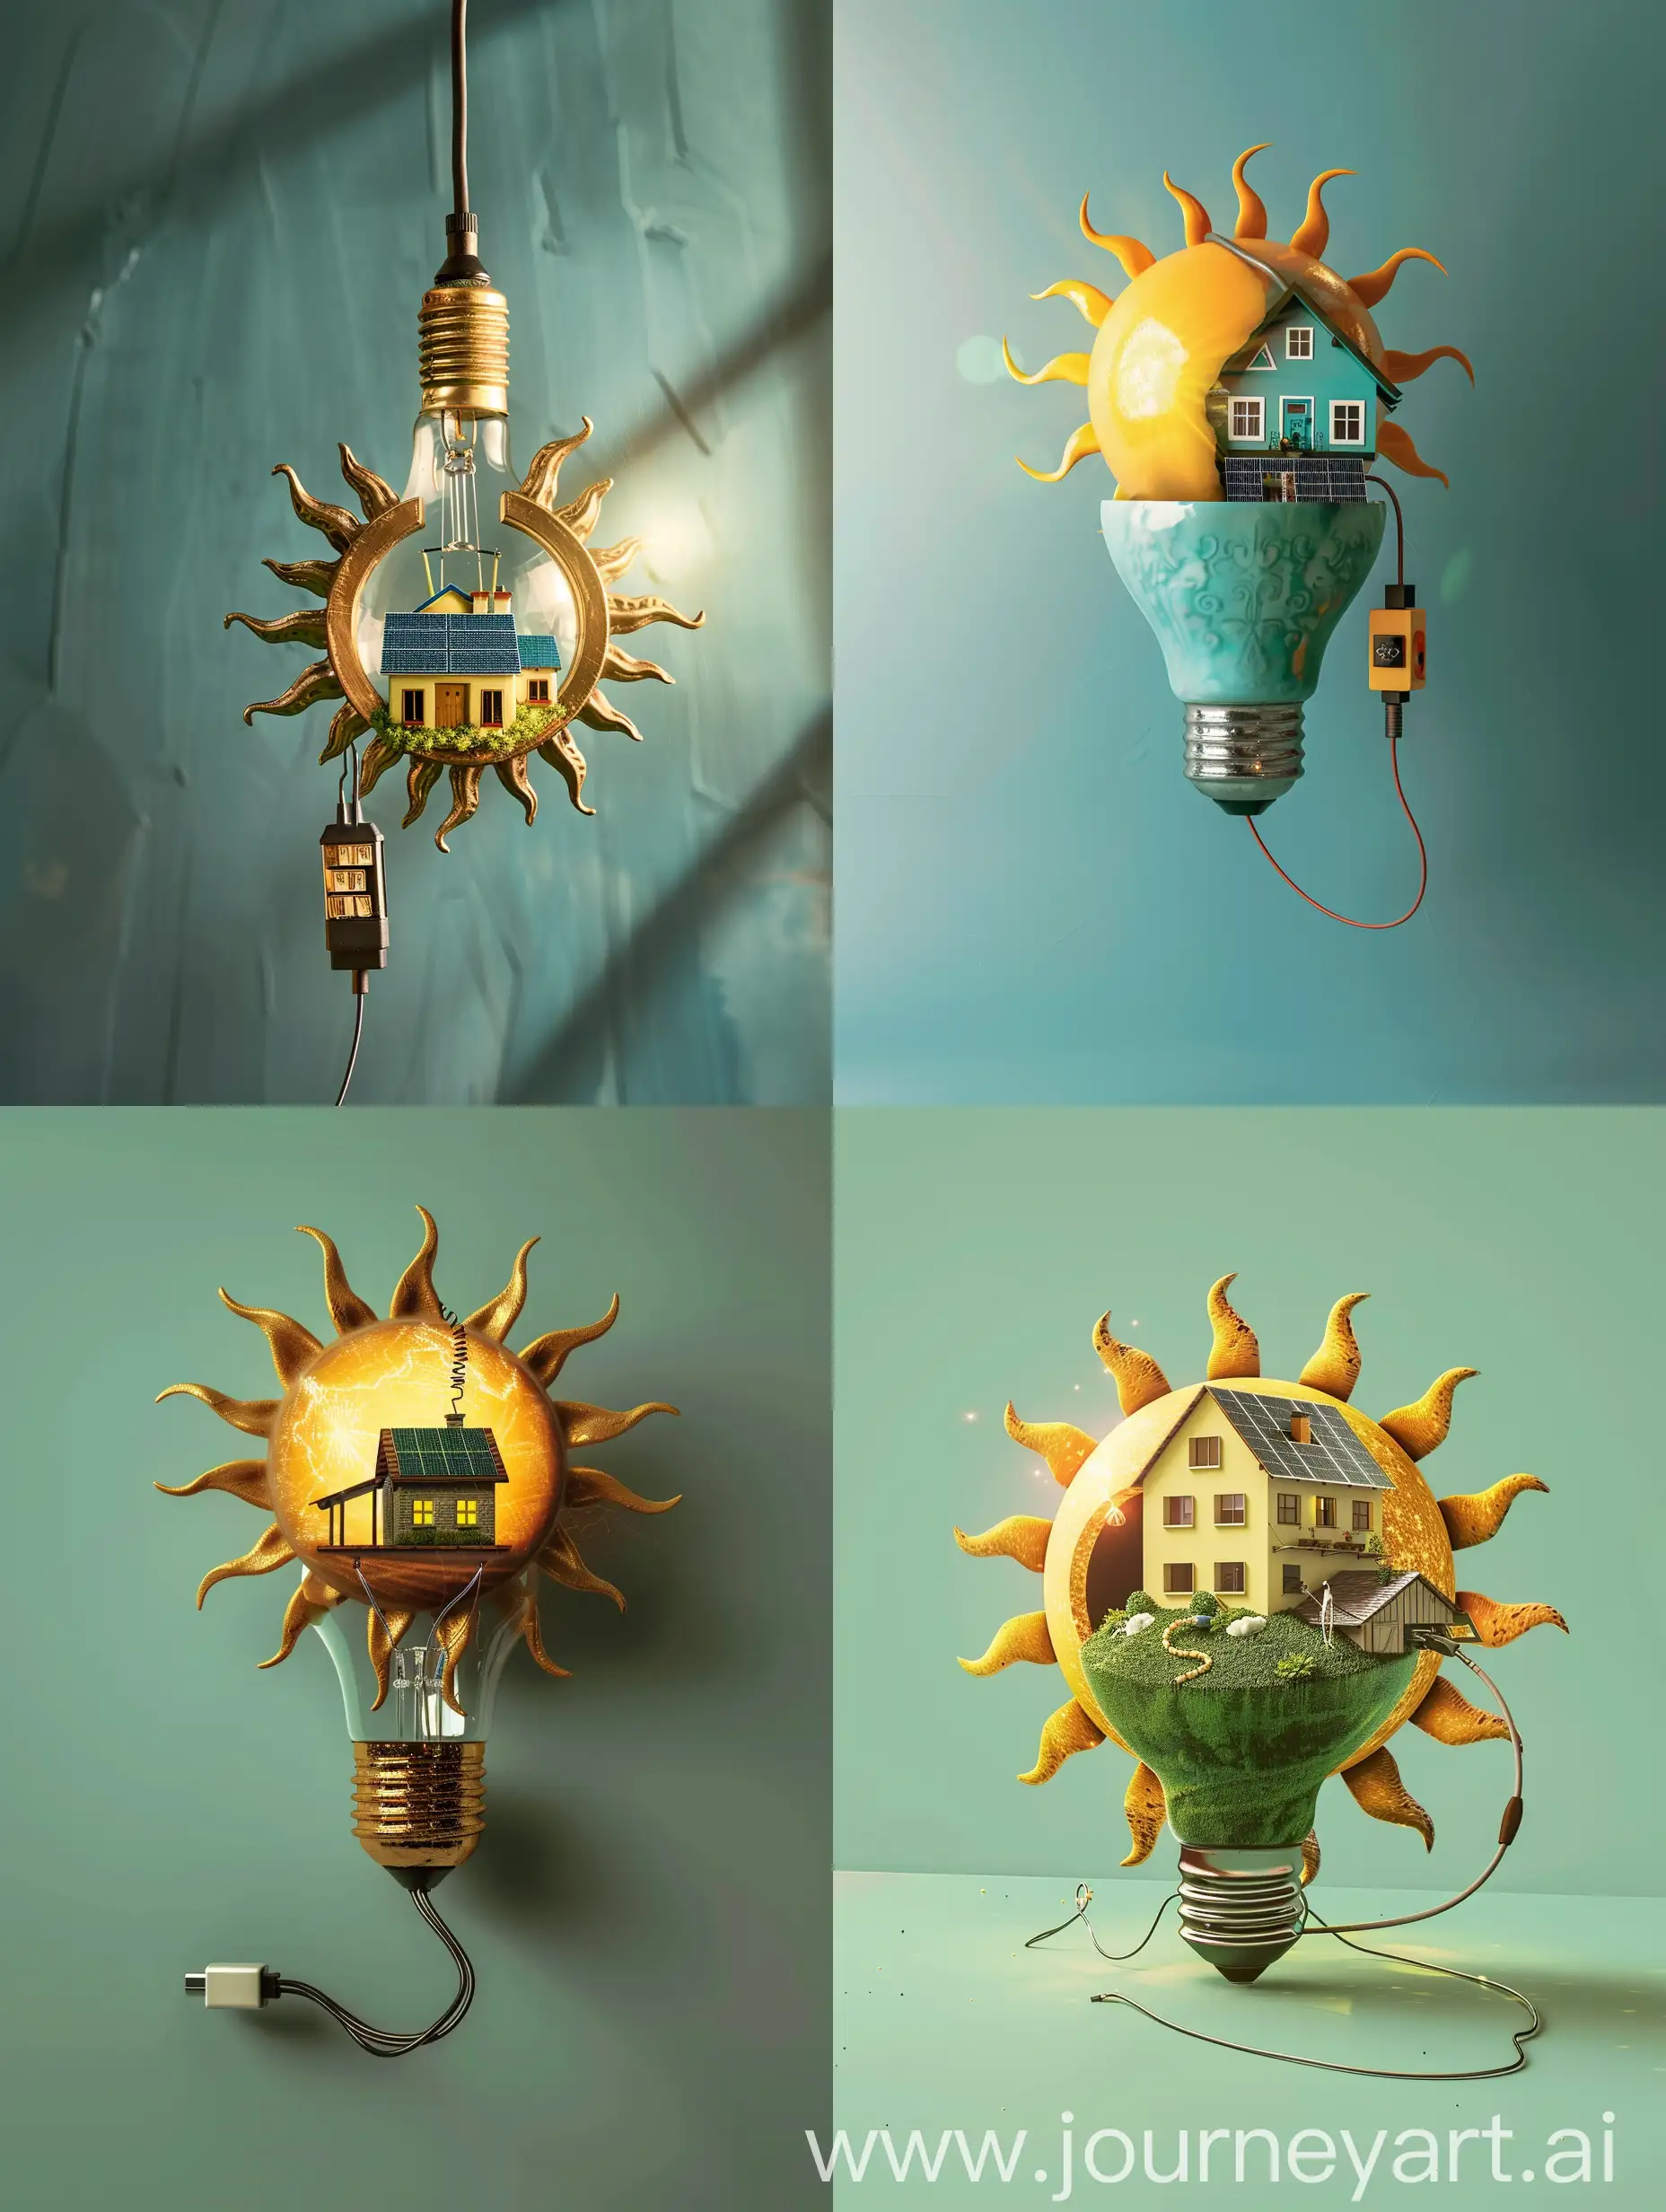 A sun attached with a power cable to a creative bulb contains a house with solar panel